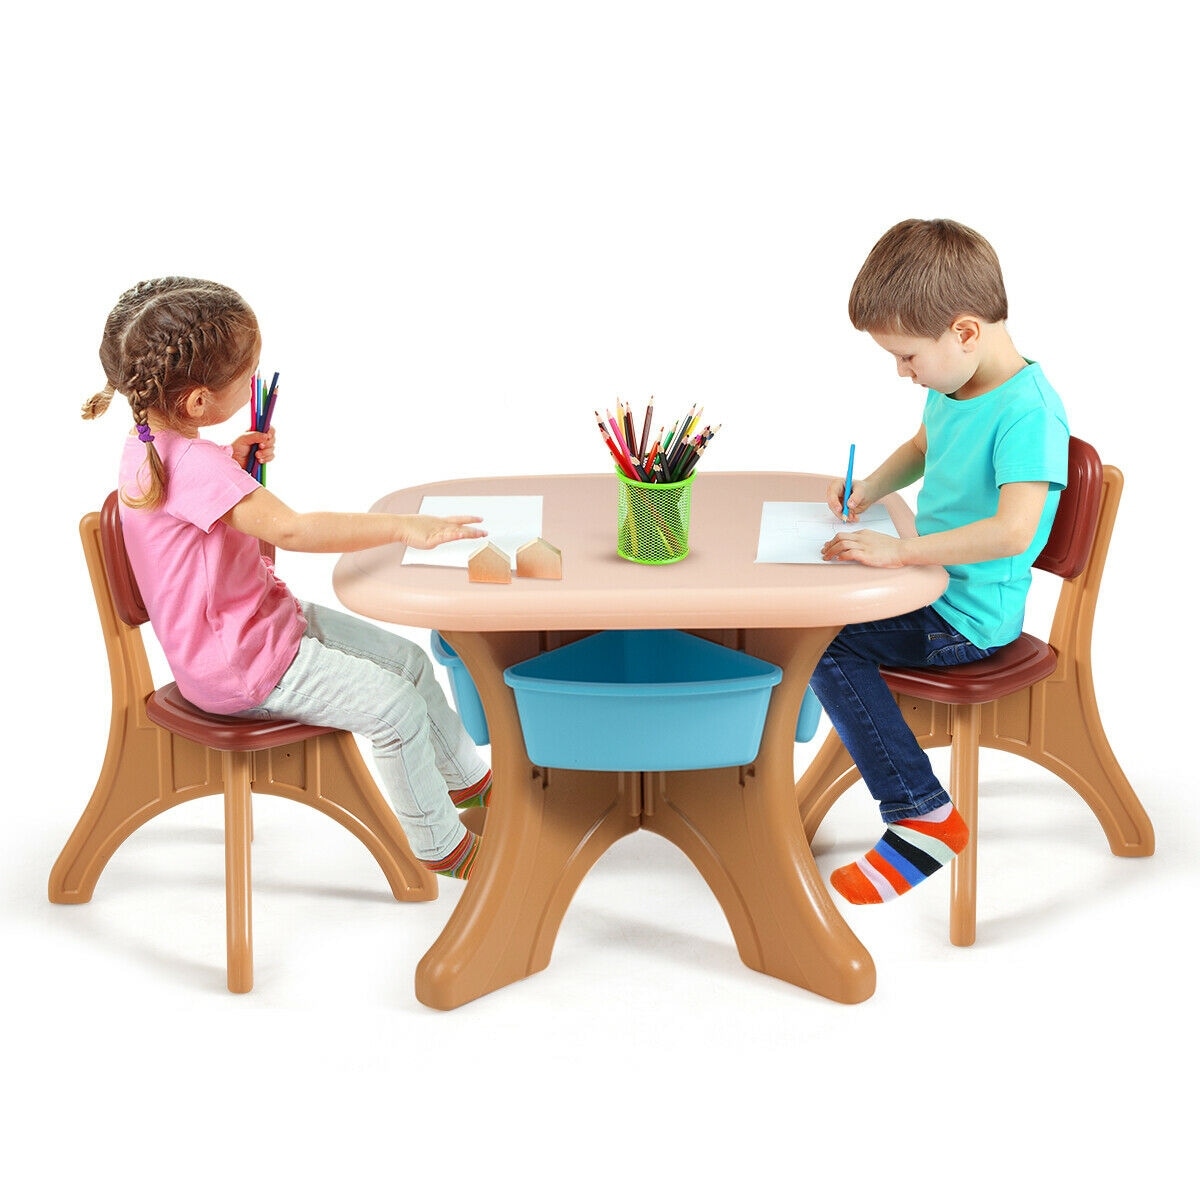 children's play table and chair set